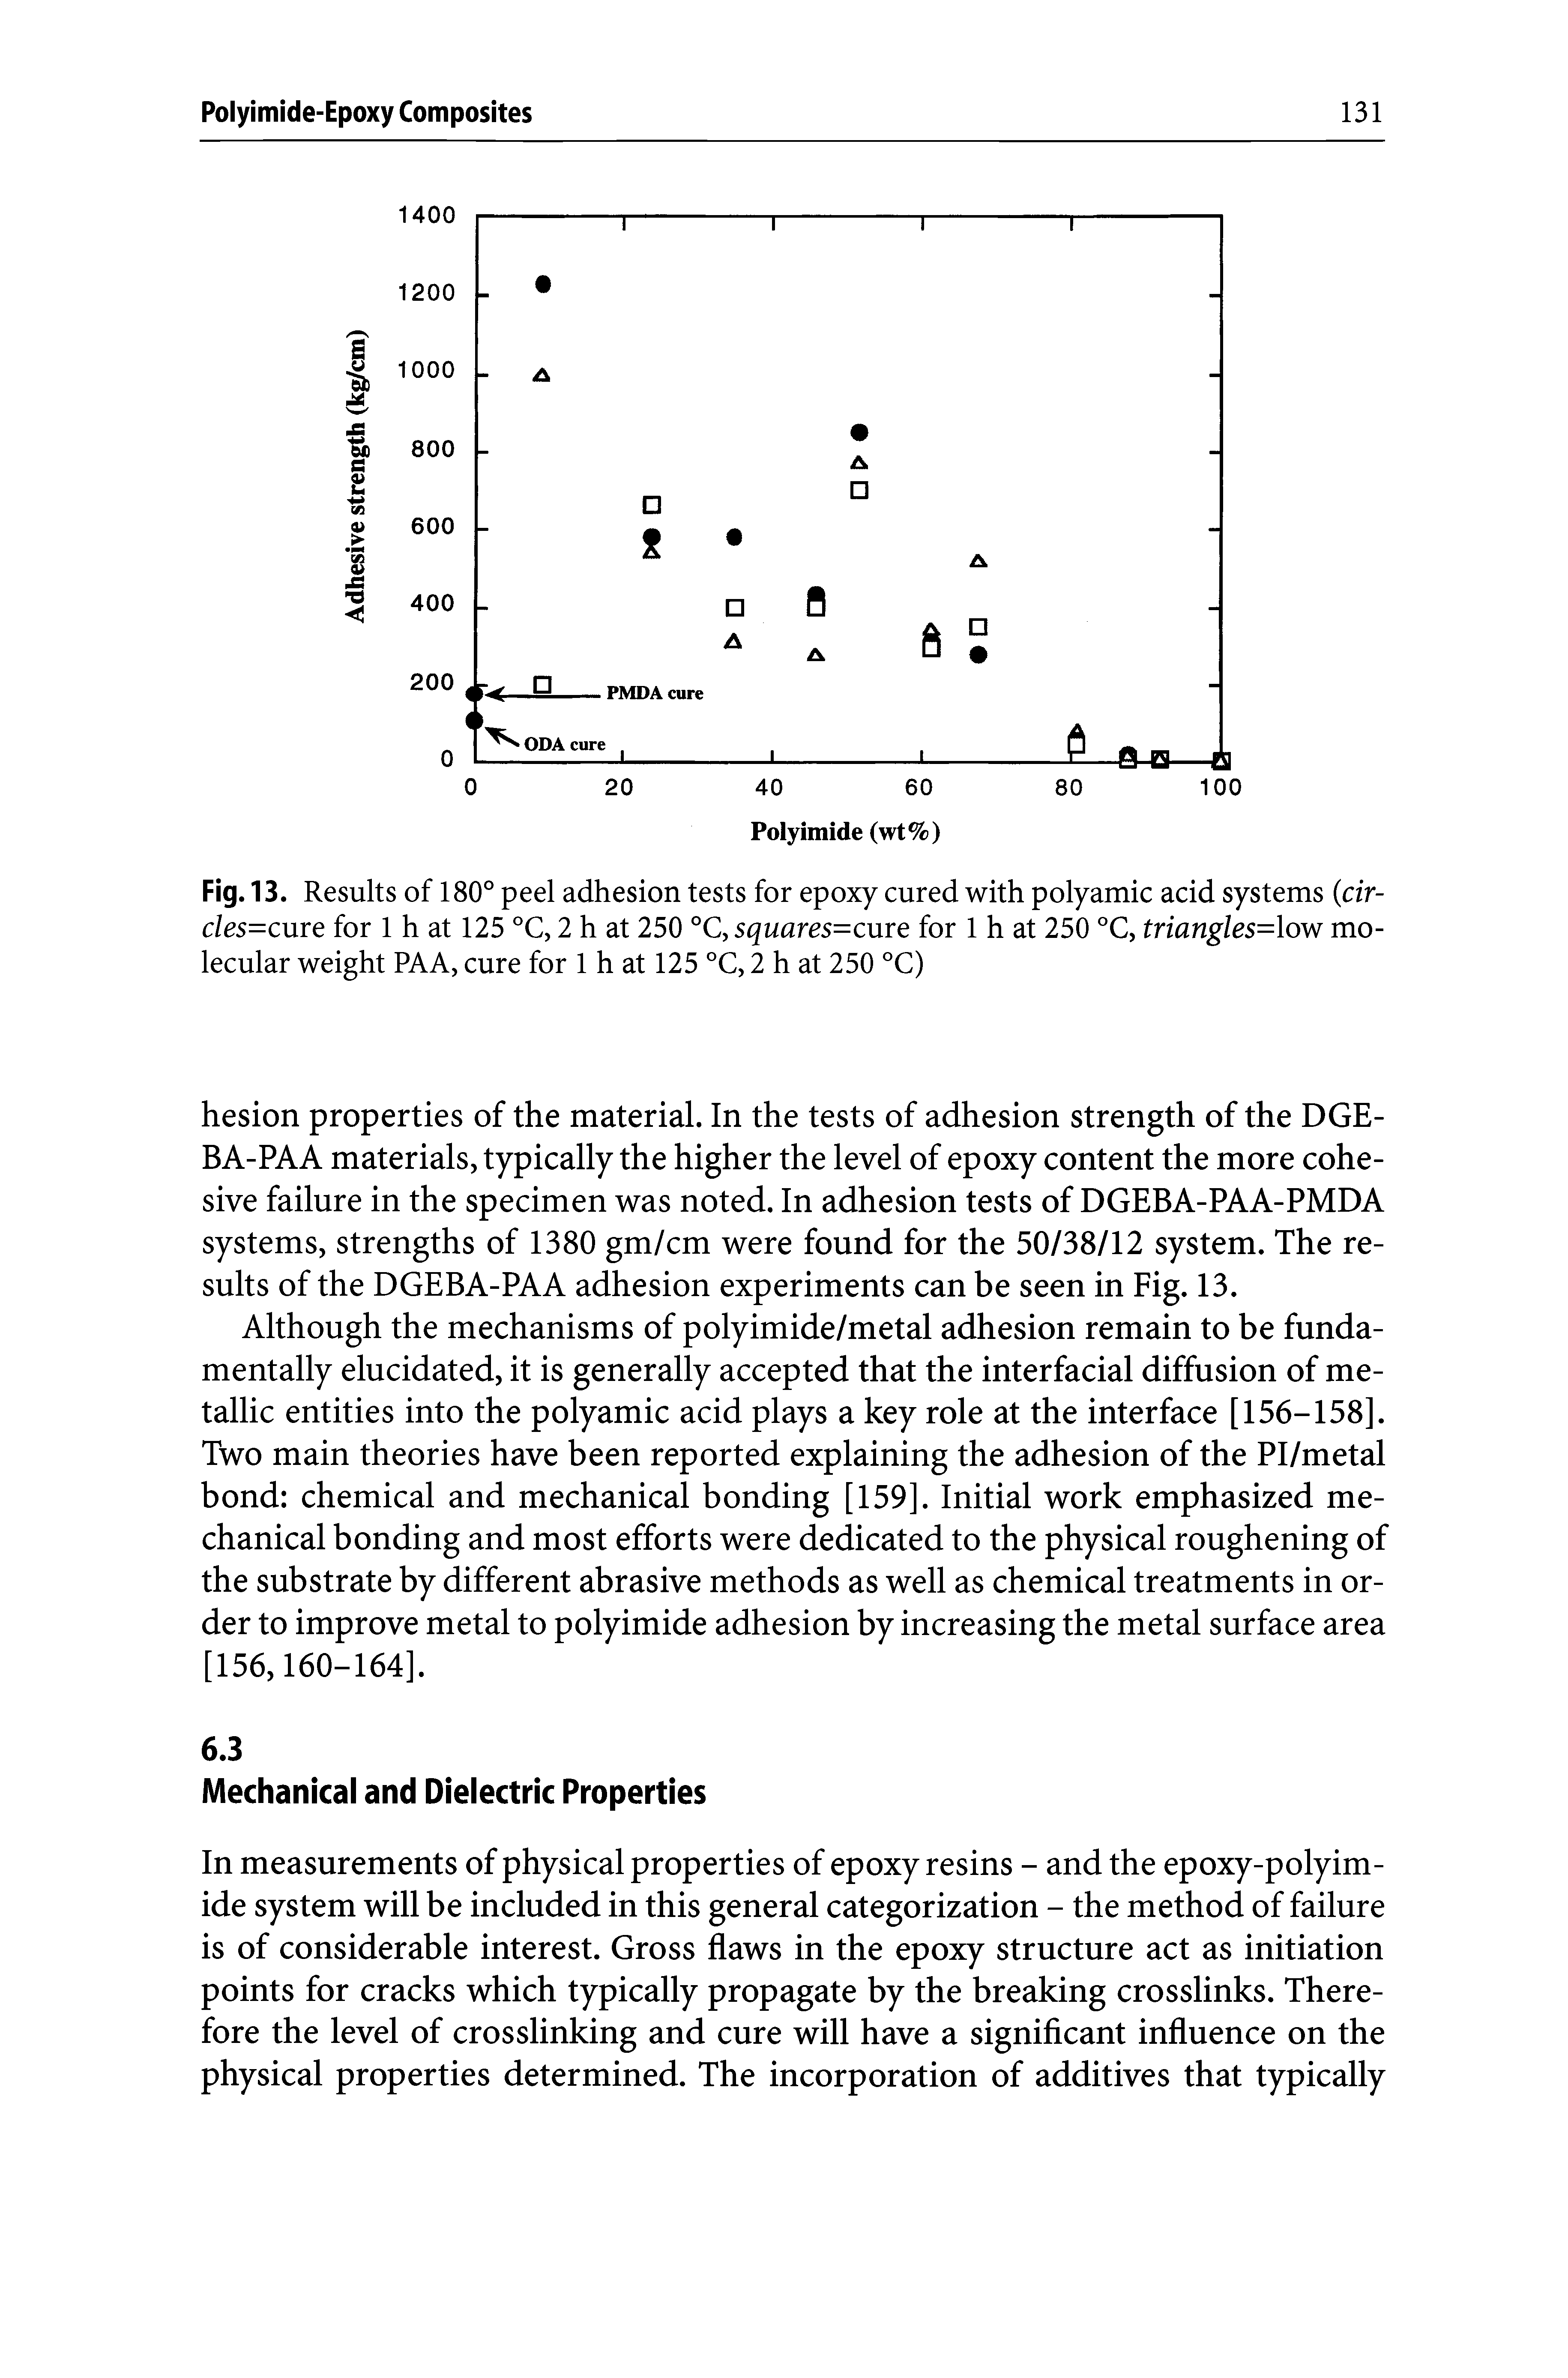 Fig. 13. Results of 180° peel adhesion tests for epoxy cured with polyamic acid systems (cir-cles=cure for 1 h at 125 °C, 2 h at 250 °C, squares=cme for 1 h at 250 °C, triangles=low molecular weight PA A, cure for 1 h at 125 °C, 2 h at 250 °C)...